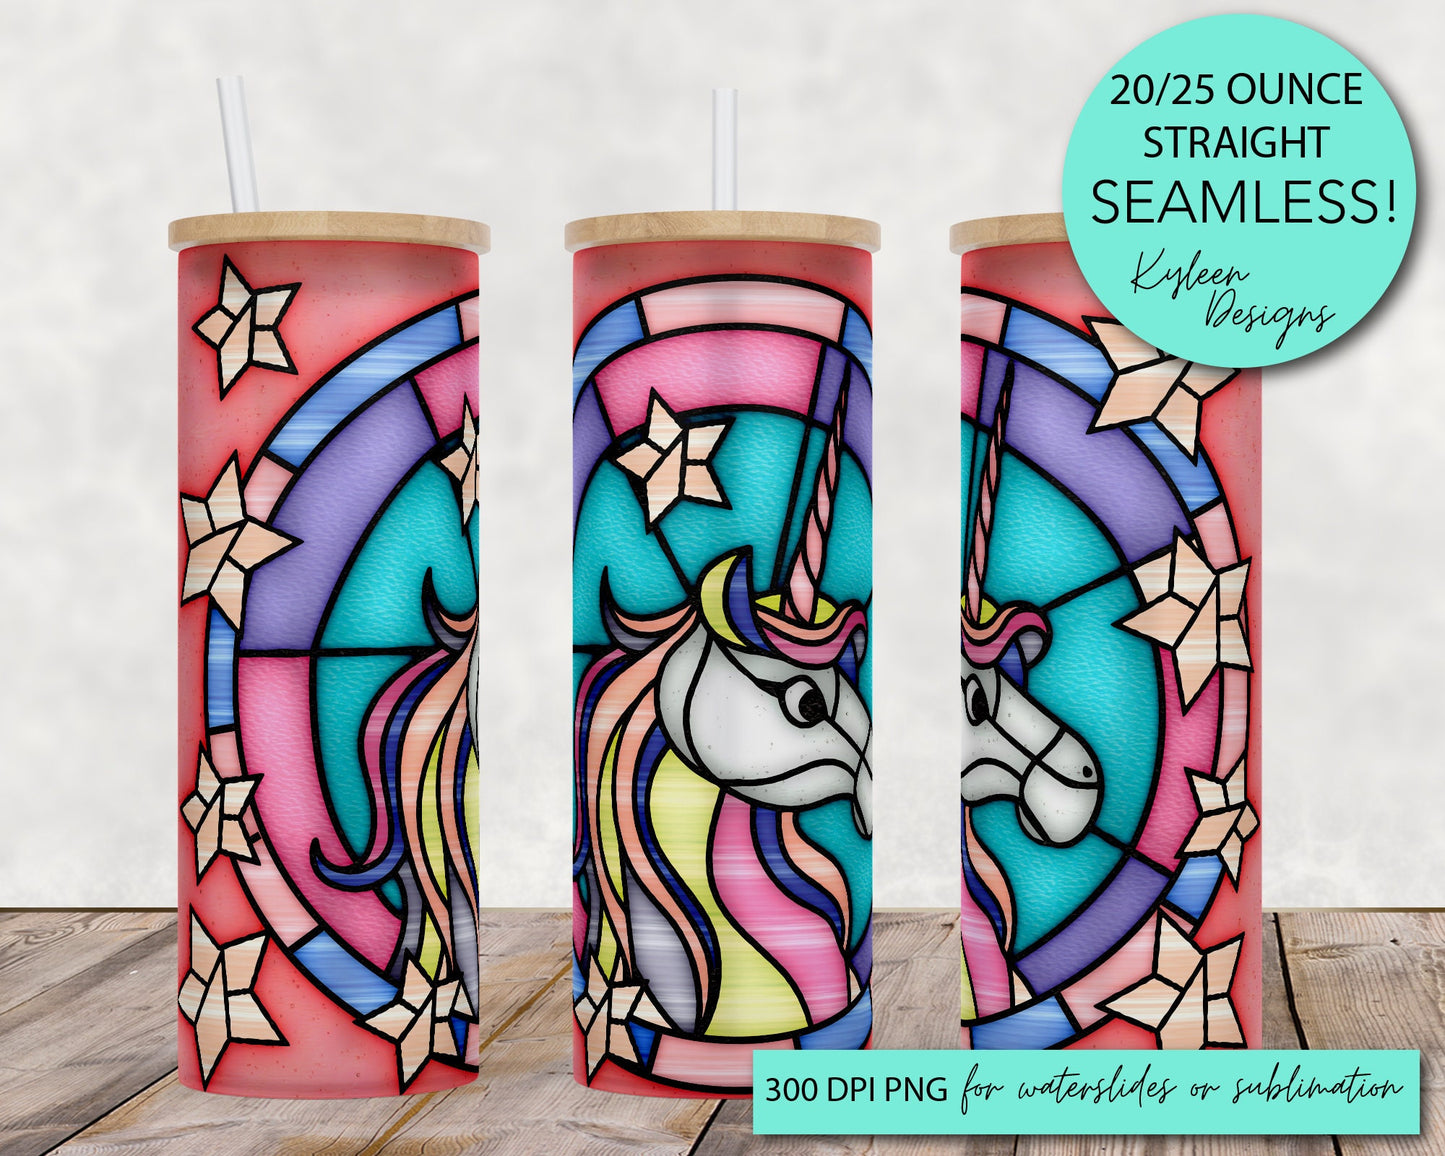 SEAMLESS Unicorn Stained glass 20/25 ounce wrap for sublimation, waterslide High res PNG digital file- Straight only